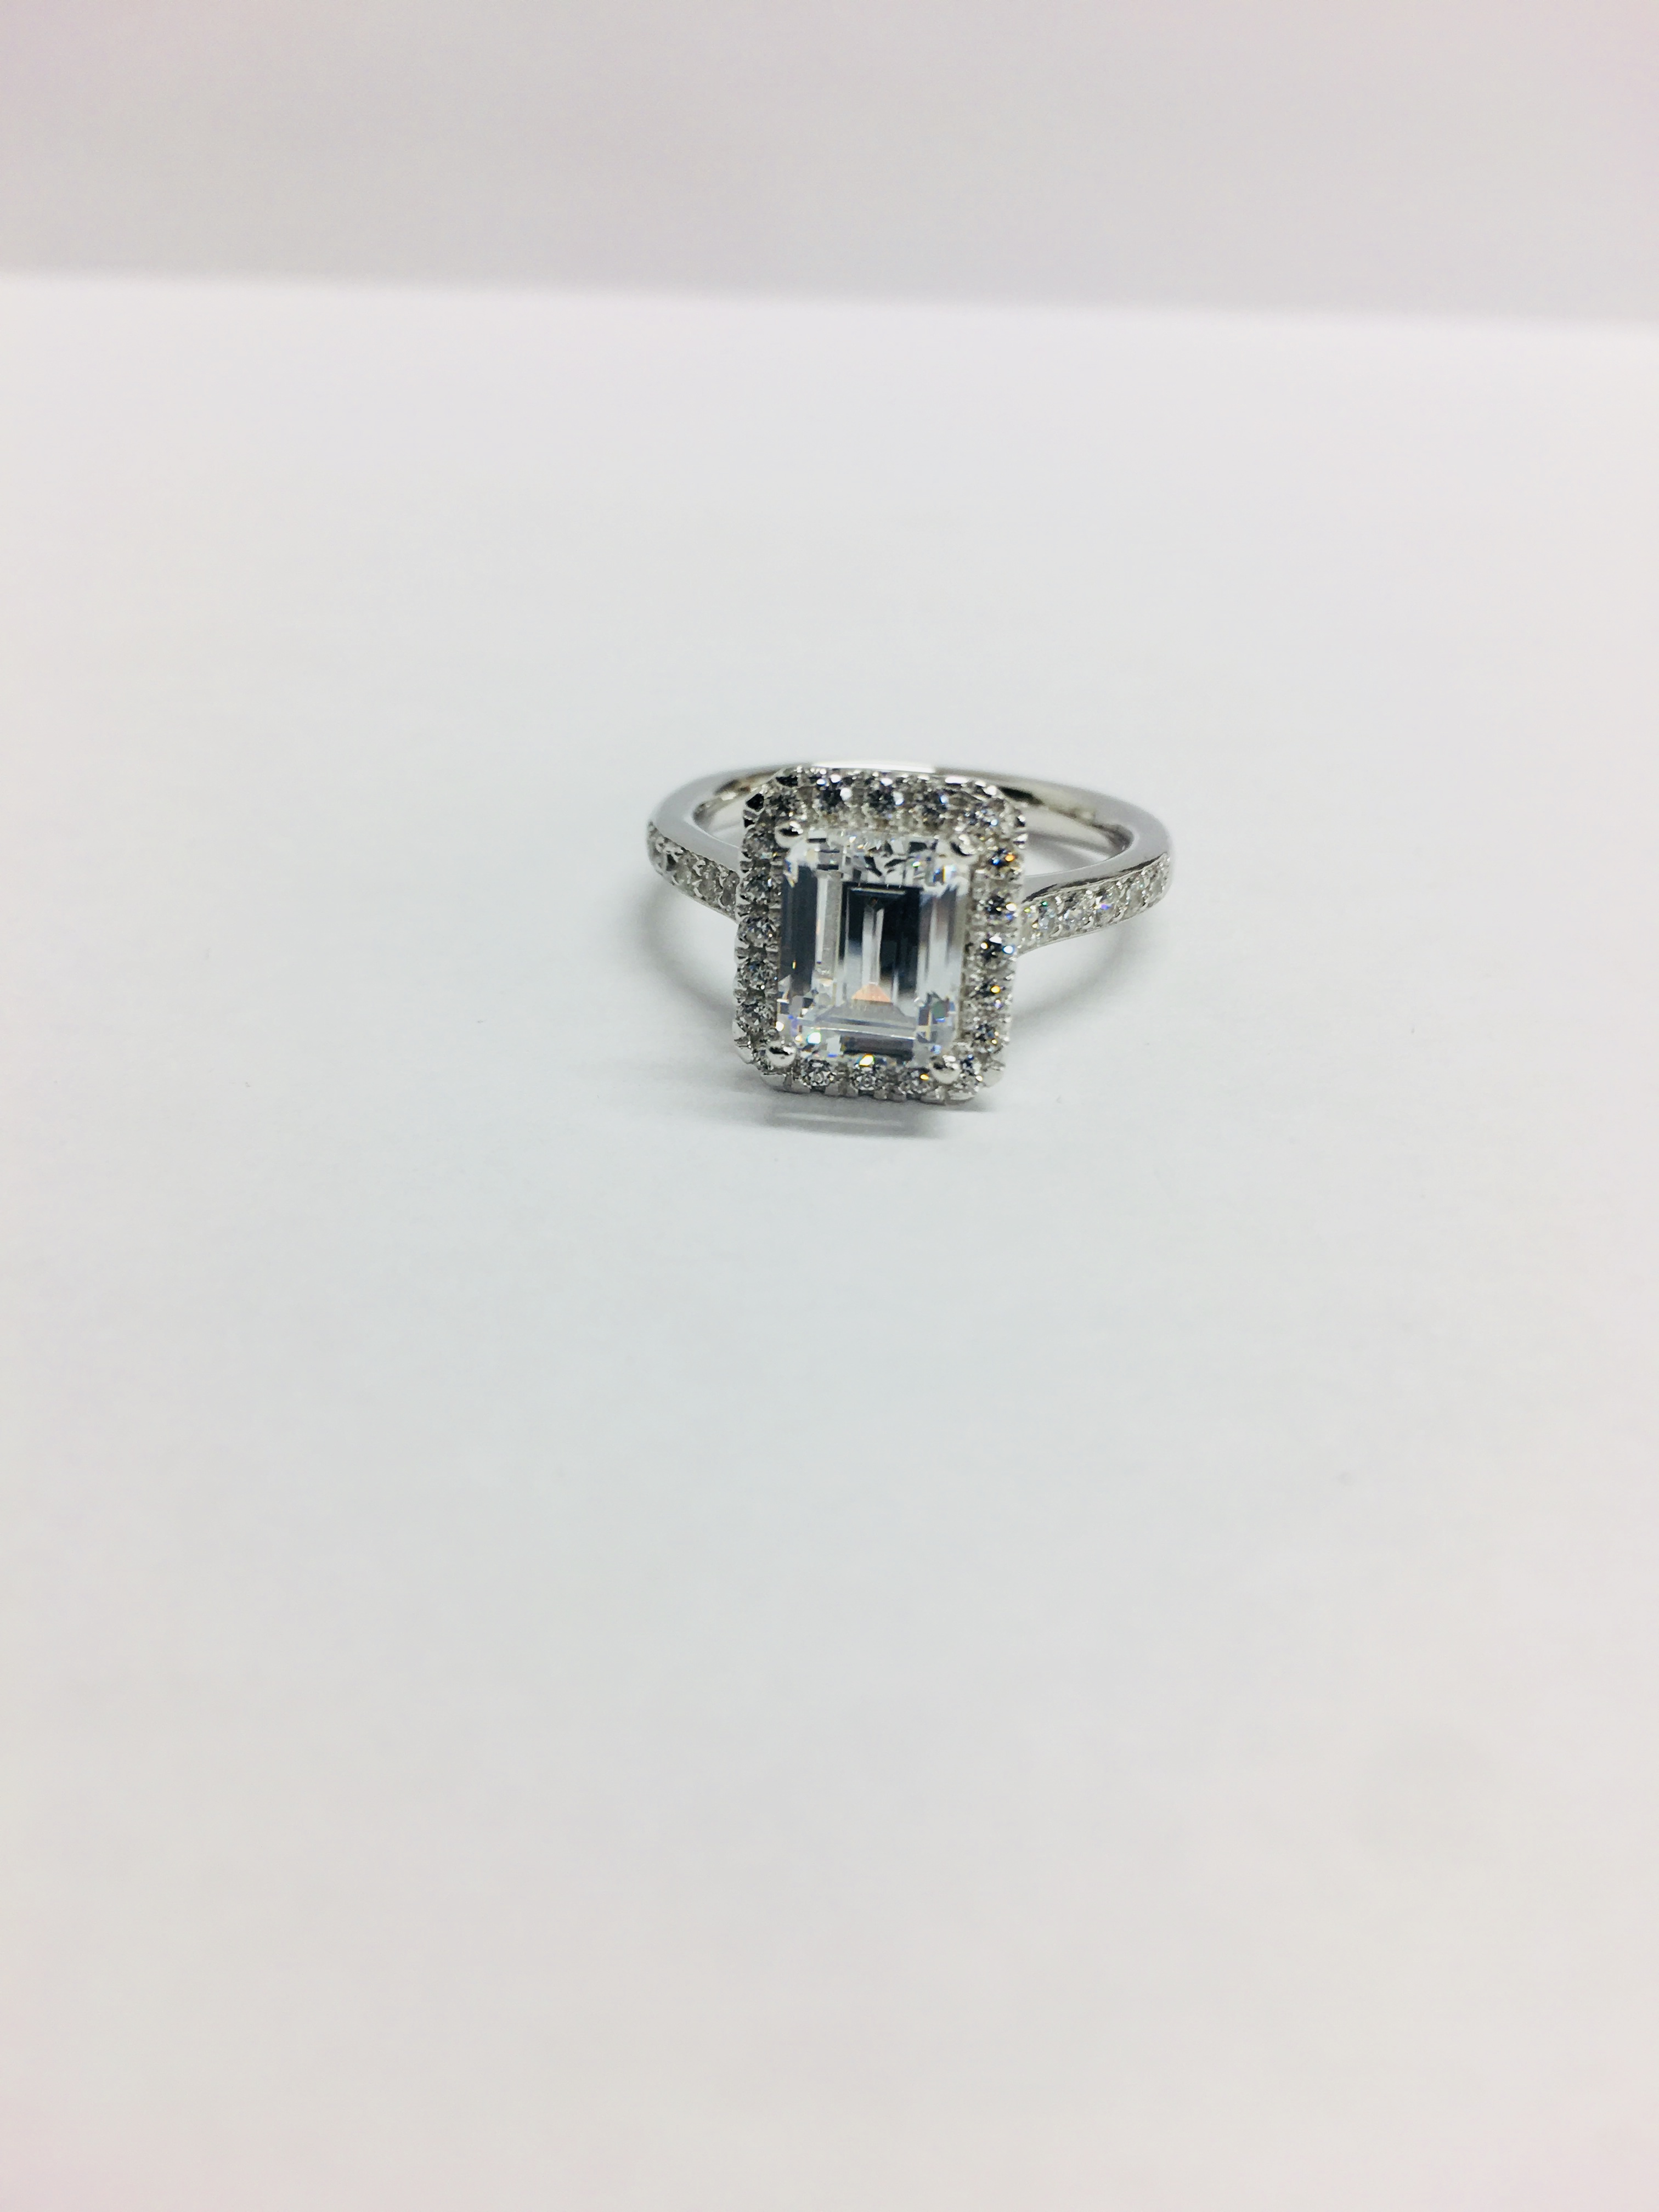 1.2ct diamond solitaire ring set with an emerald cut diamond - Image 8 of 8